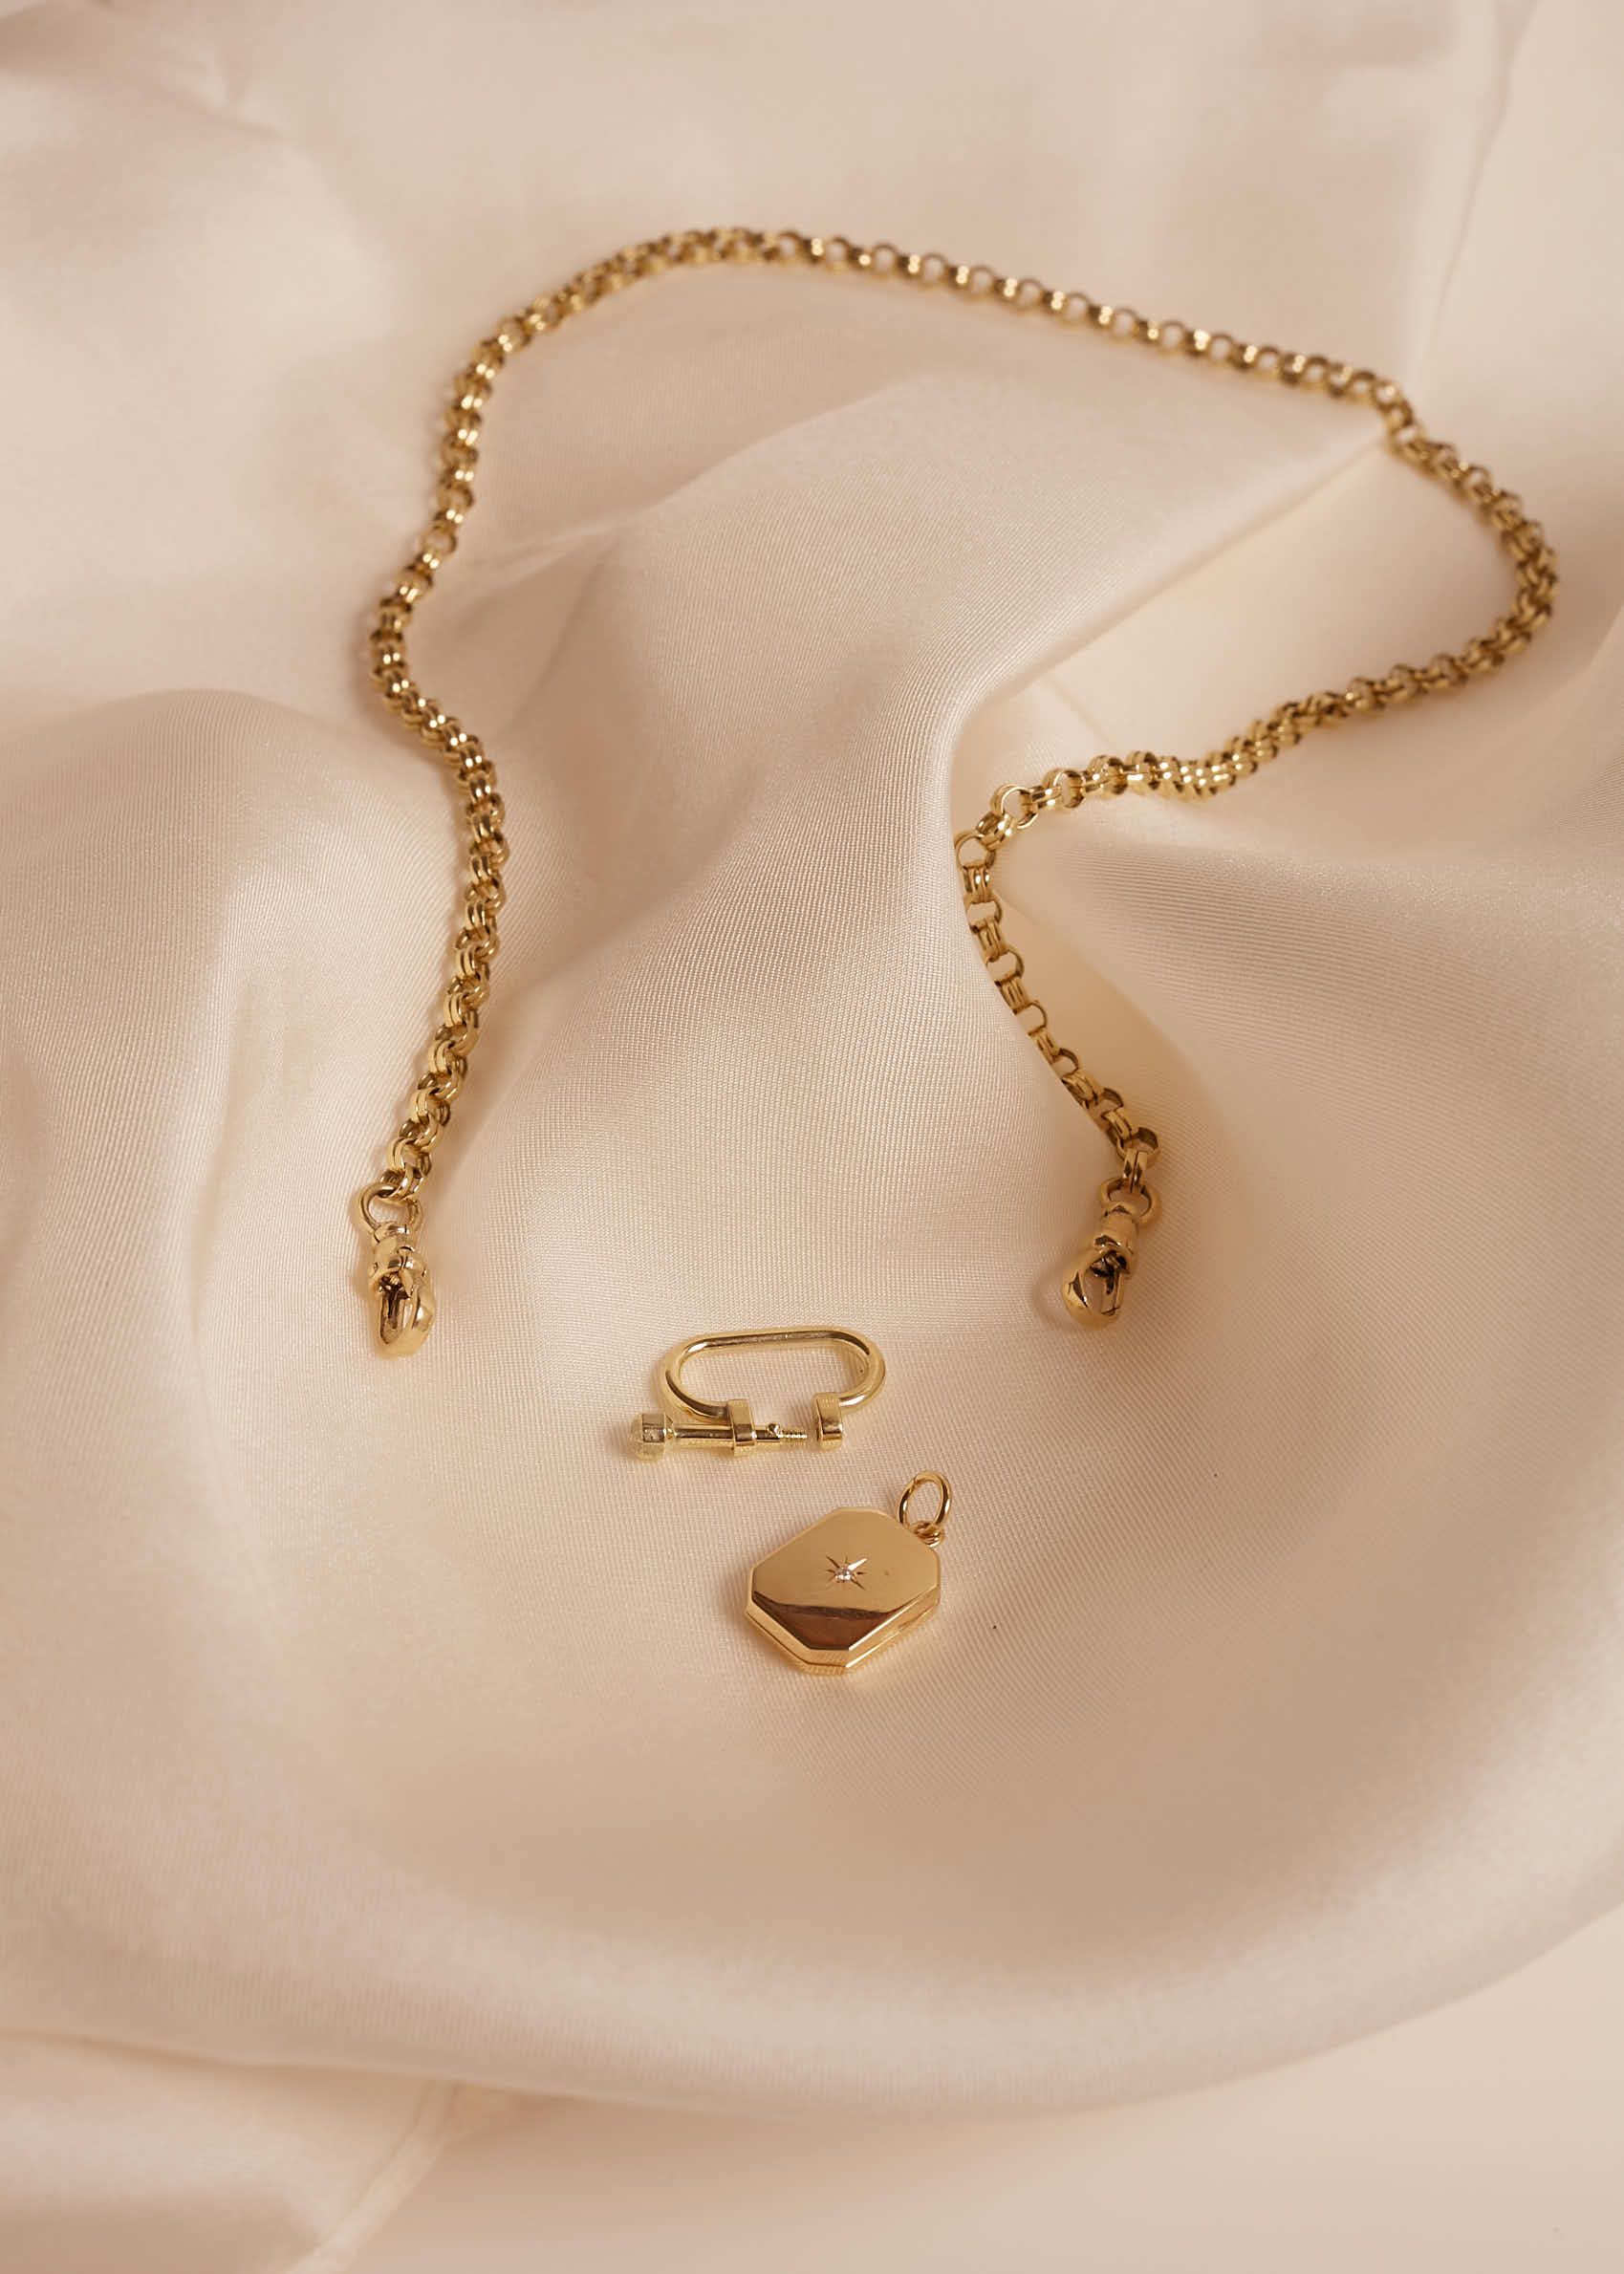 Elegant and Versatile: The Long O-Ring Double Chain Necklace